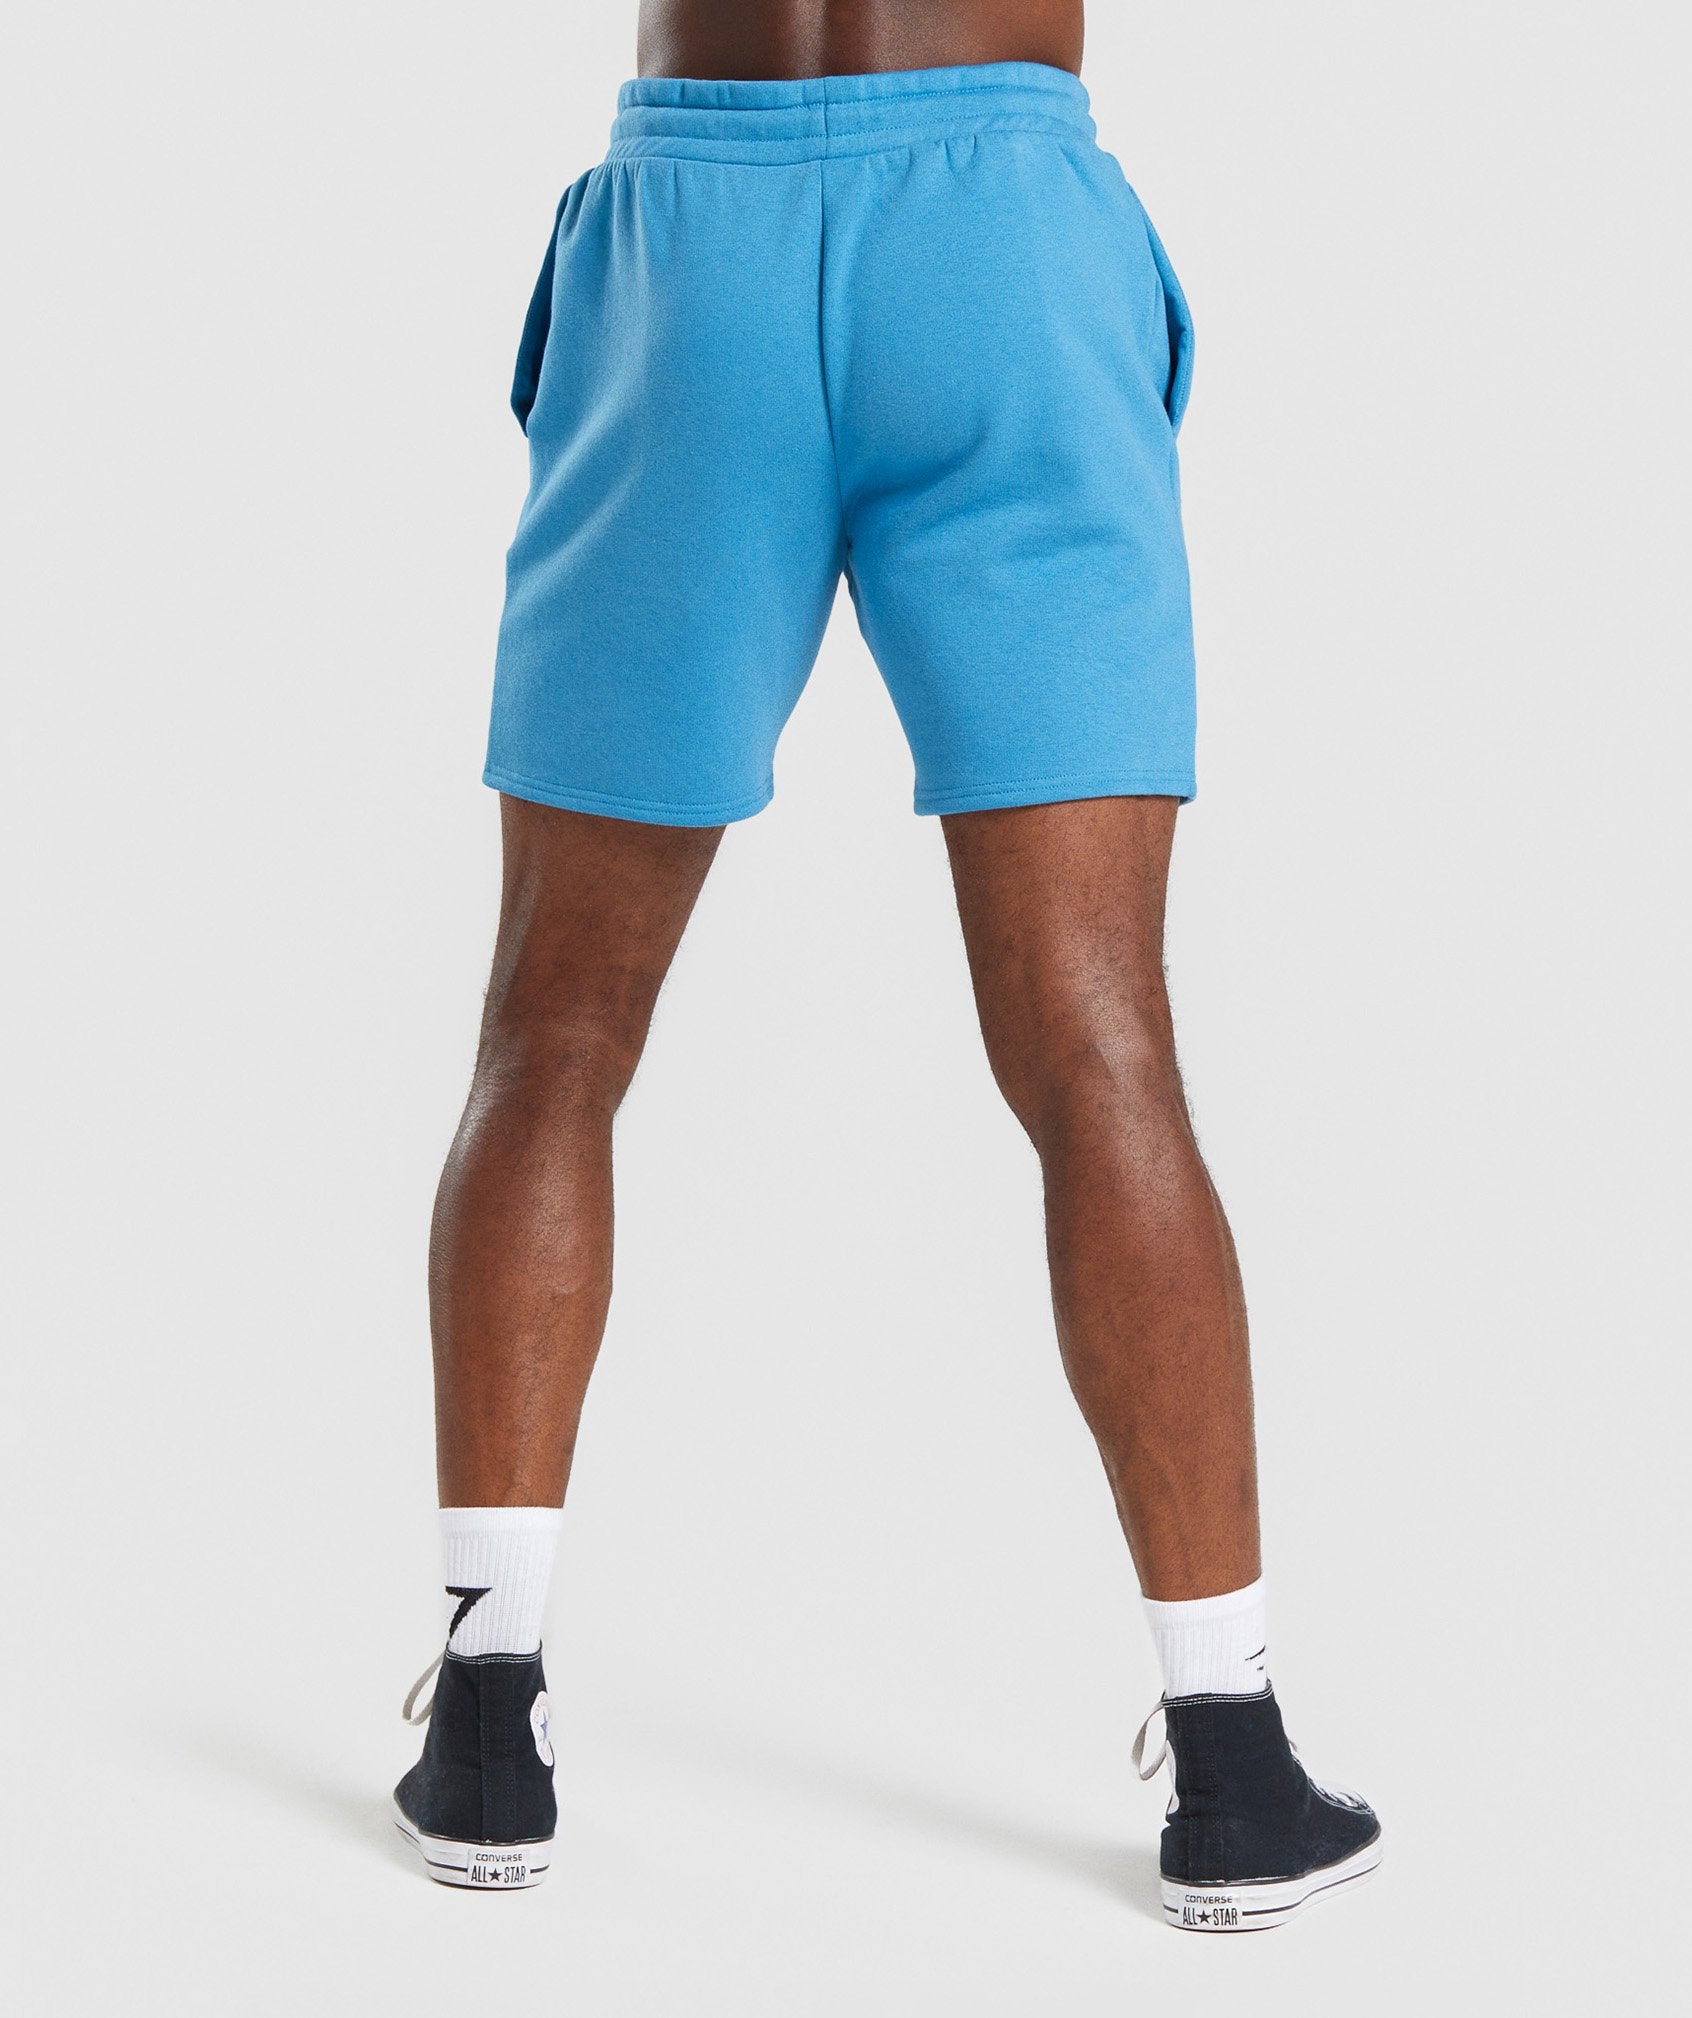 Legacy Shorts in Blue - view 3